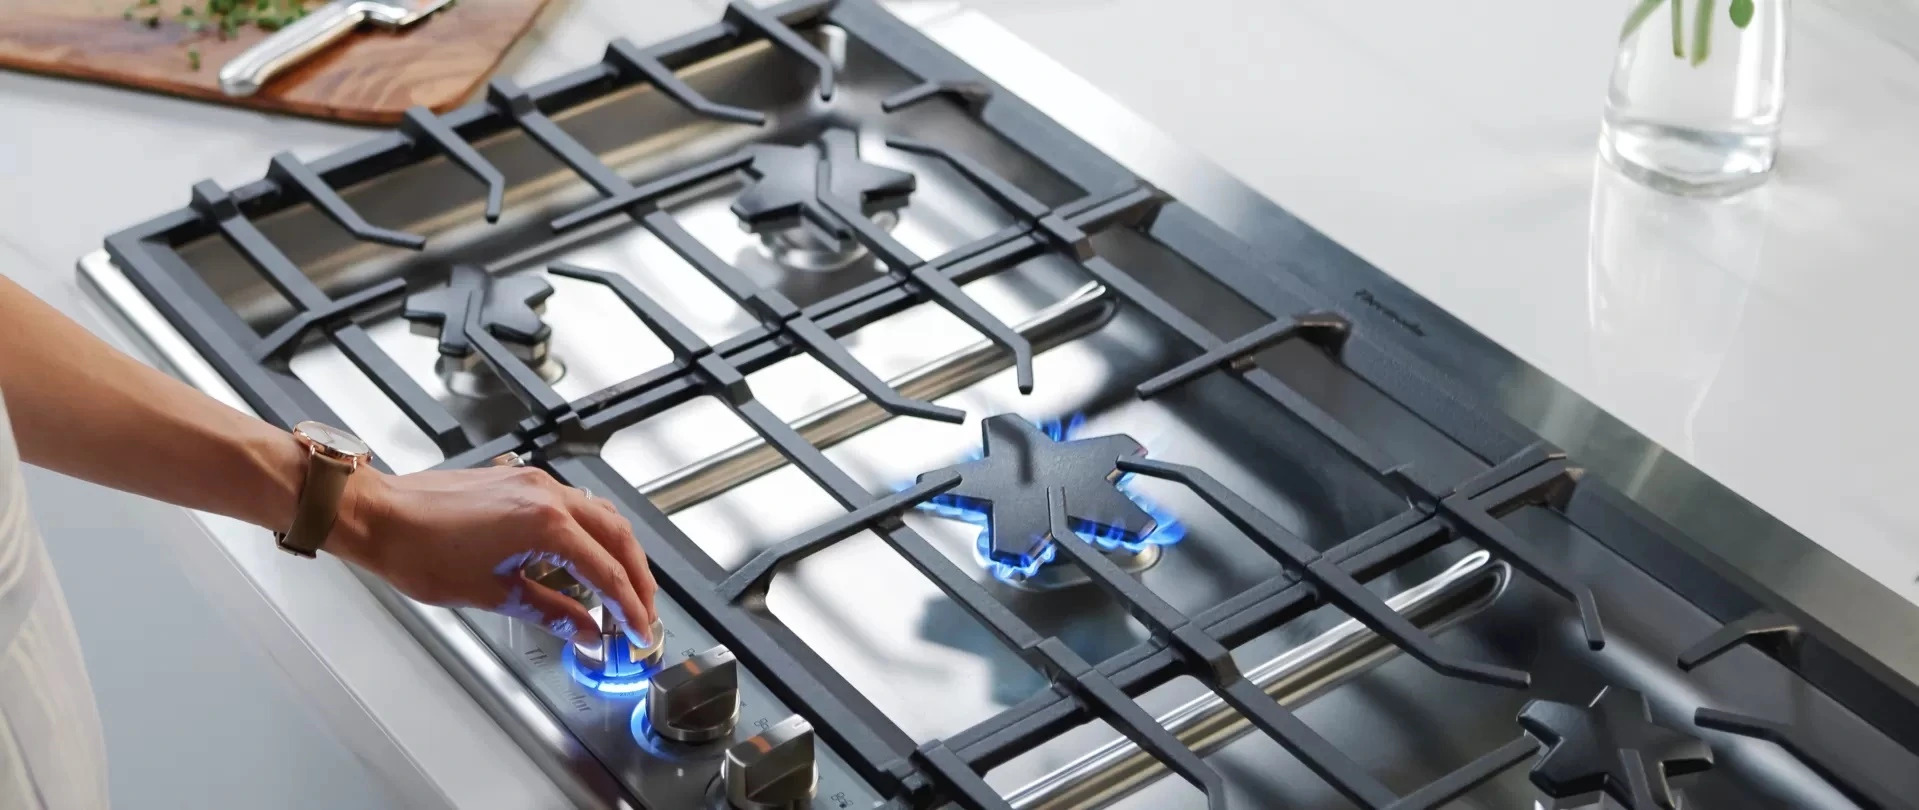 How To Adjust Uneven Gas Stove Burners